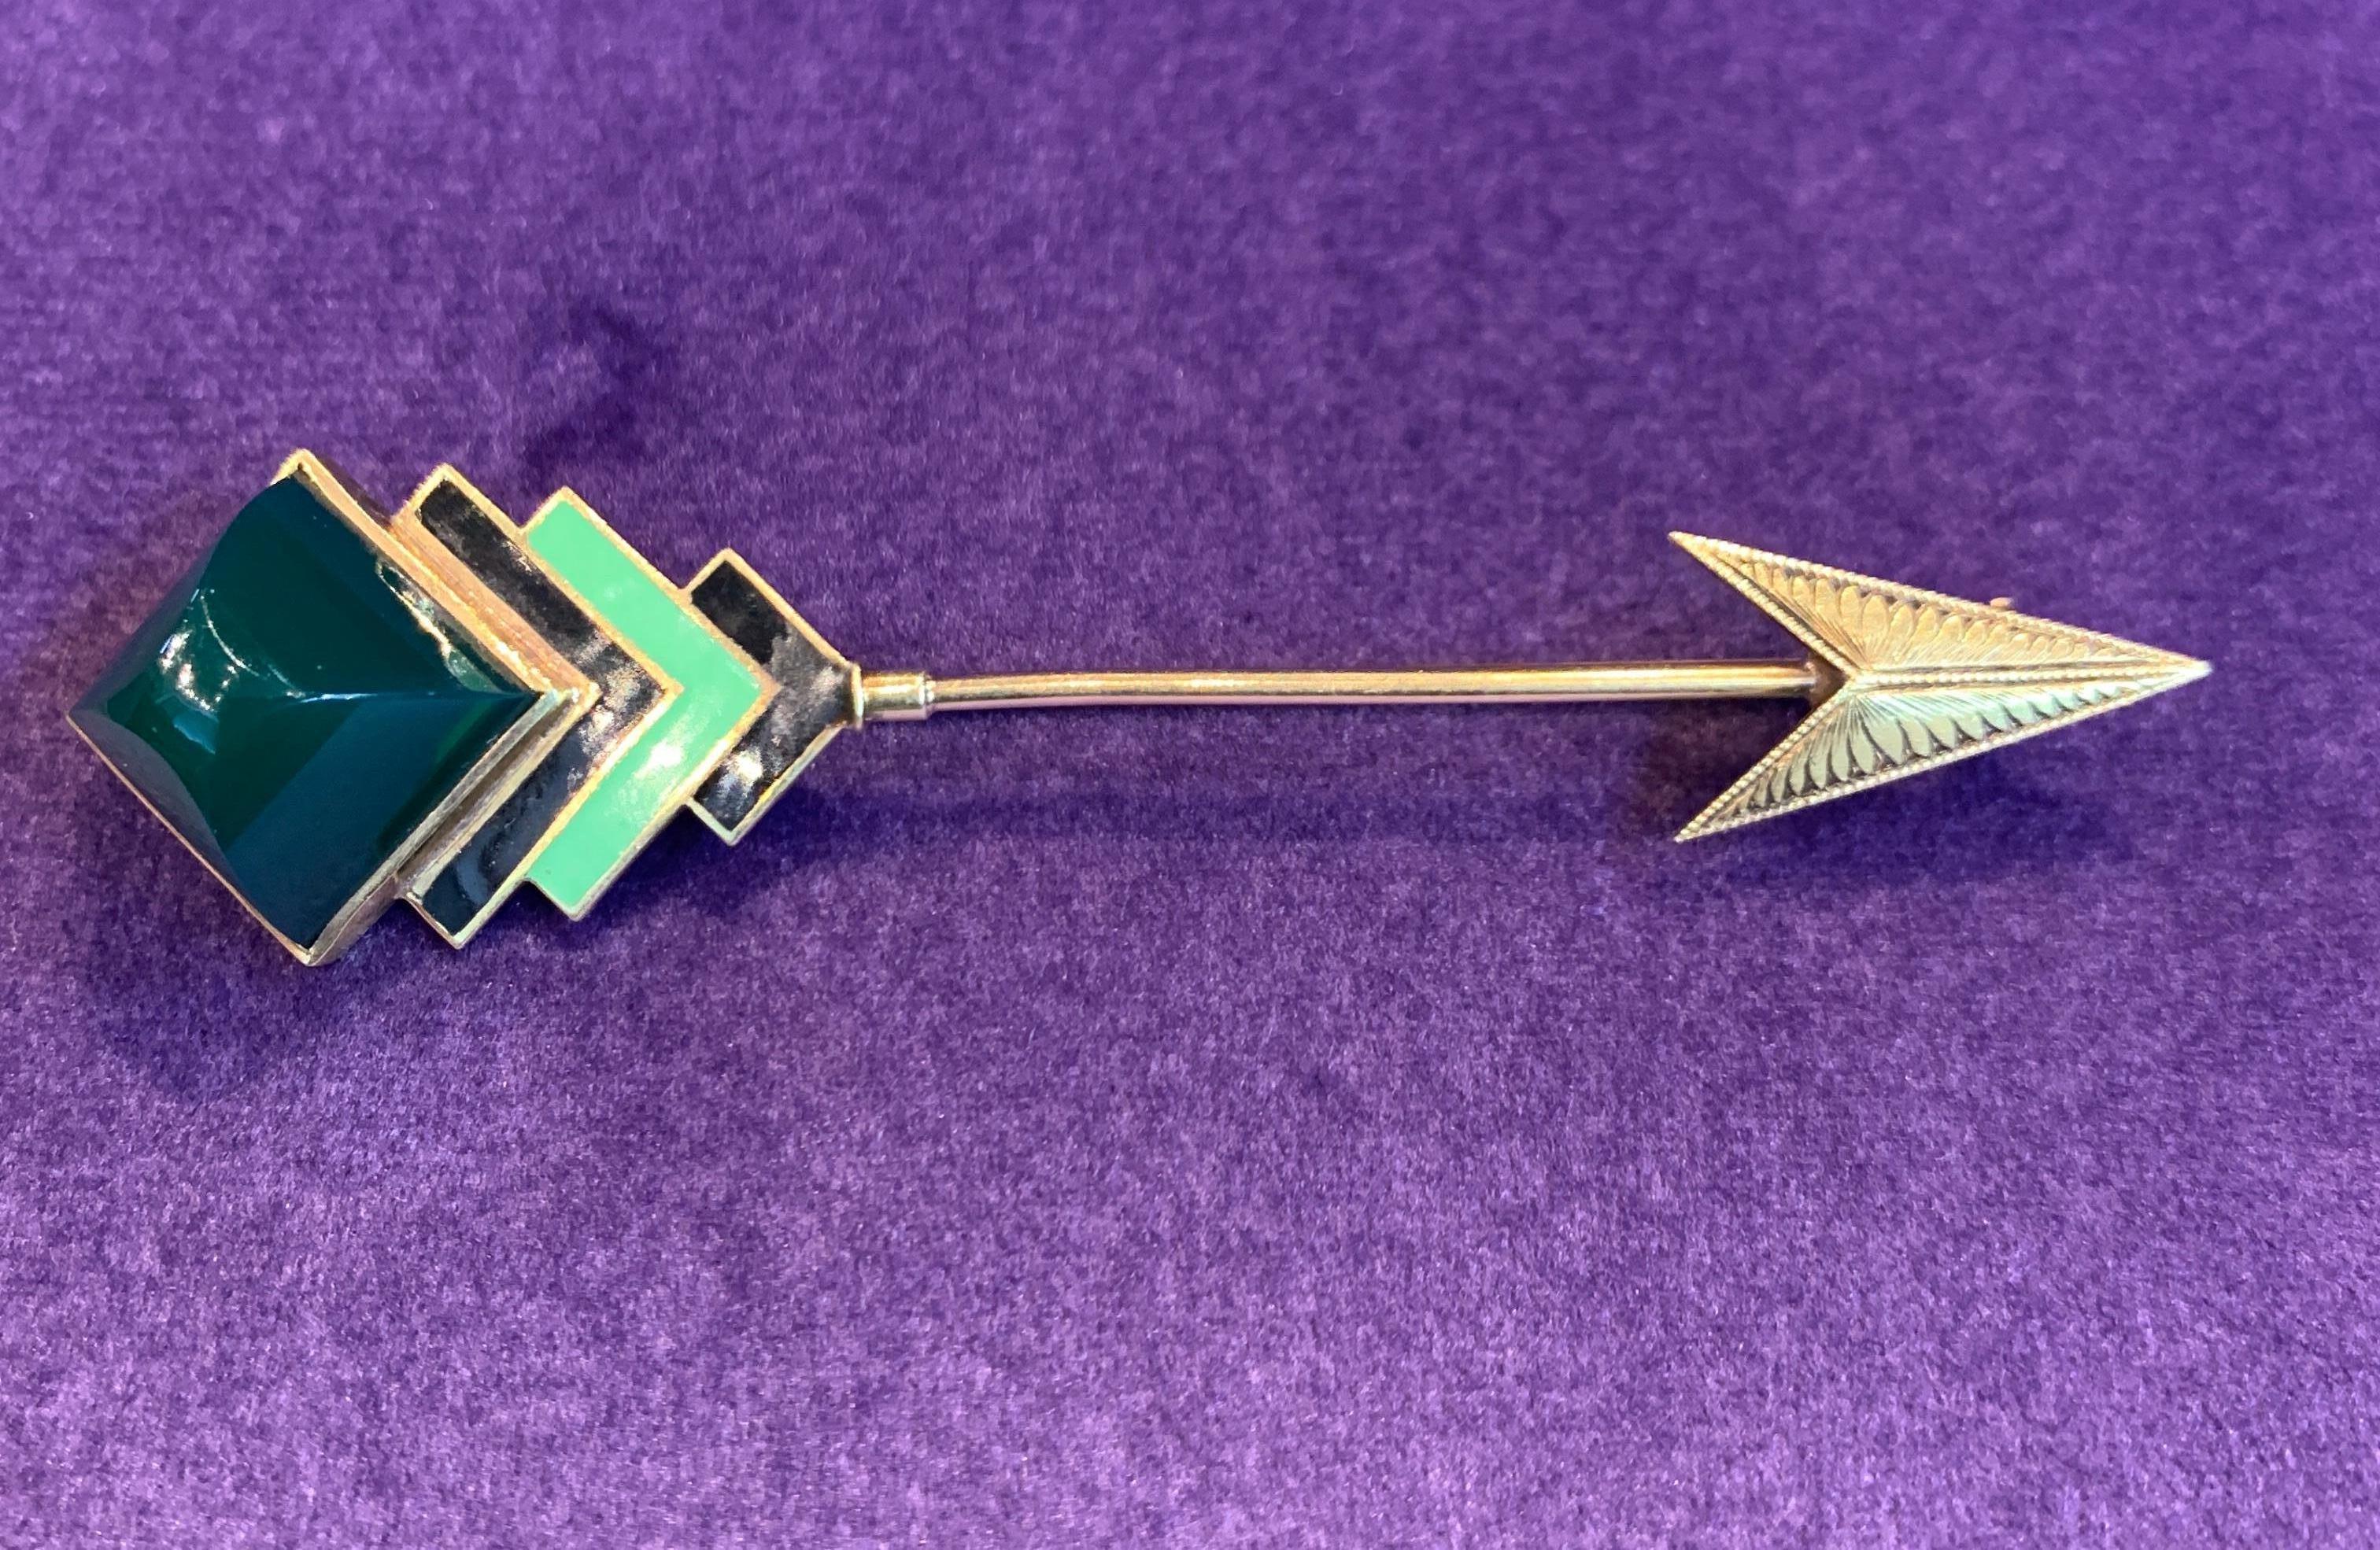 Agate, Yellow Gold, green agate and Enamel Men's Stickpin made Circa 1930 
14K Yellow Gold
Measurements: 3 inches long